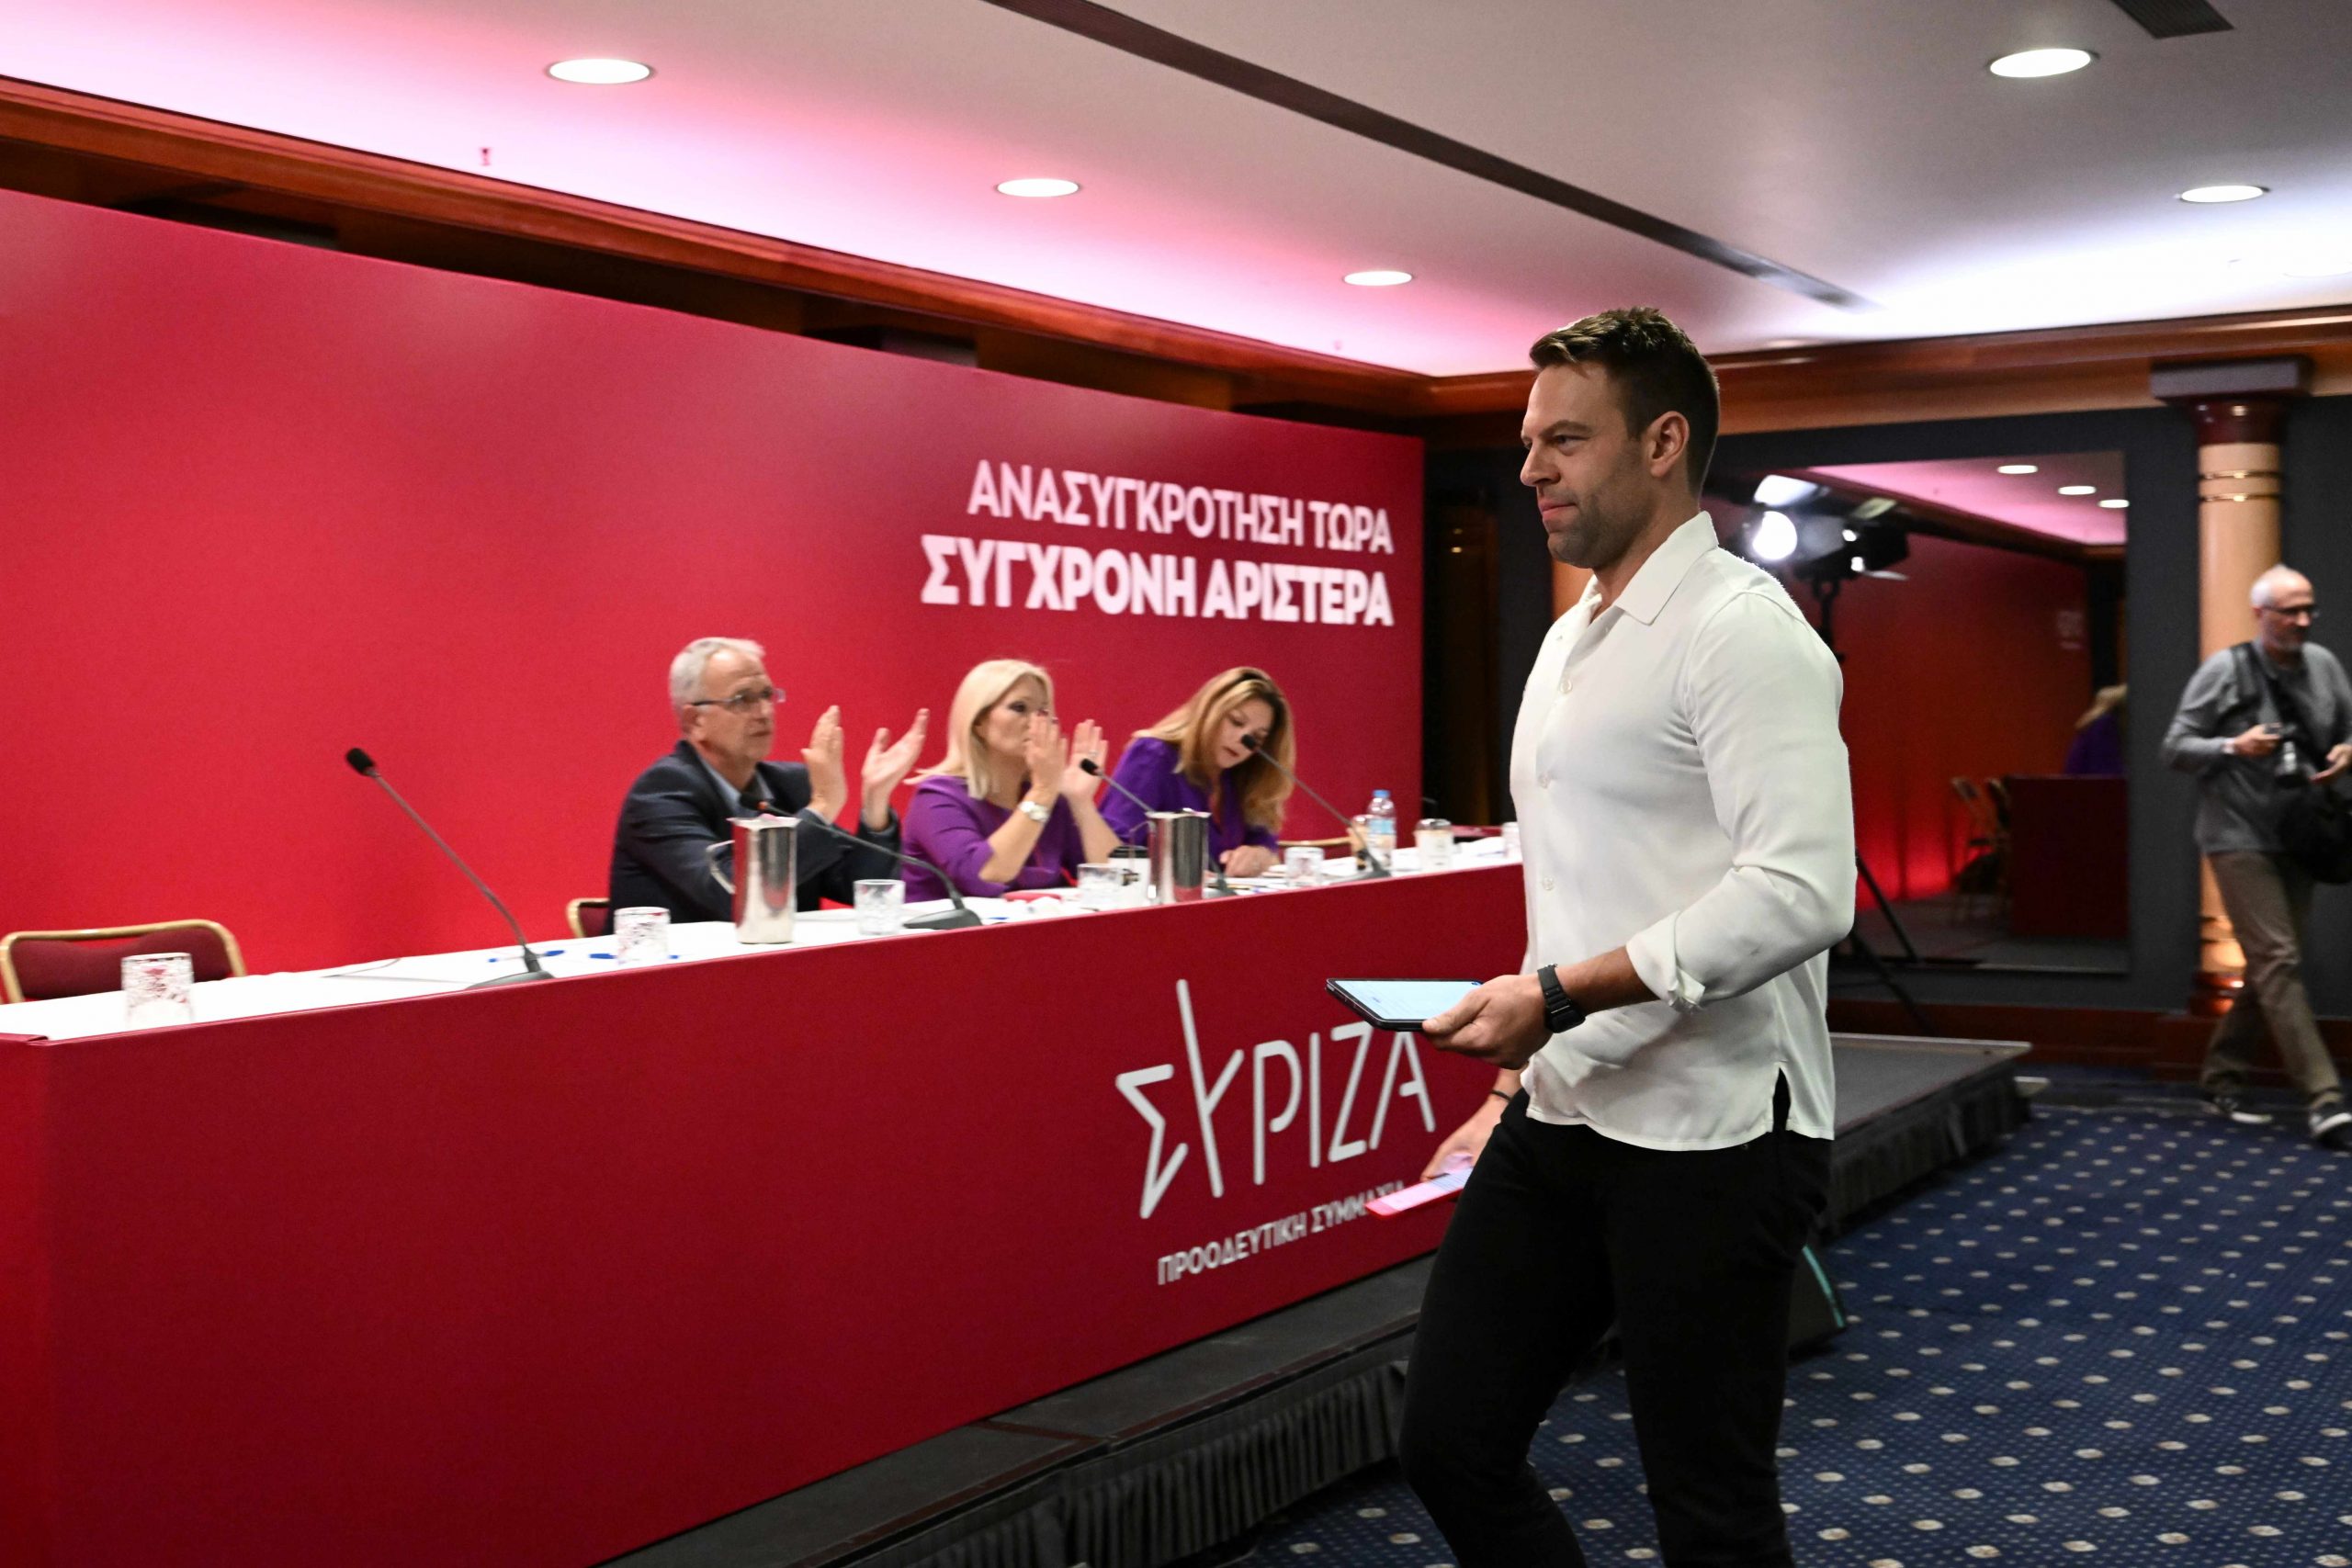 Letter by 87 MPs, Cadres Takes SYRIZA Leader Kasselakis to Task